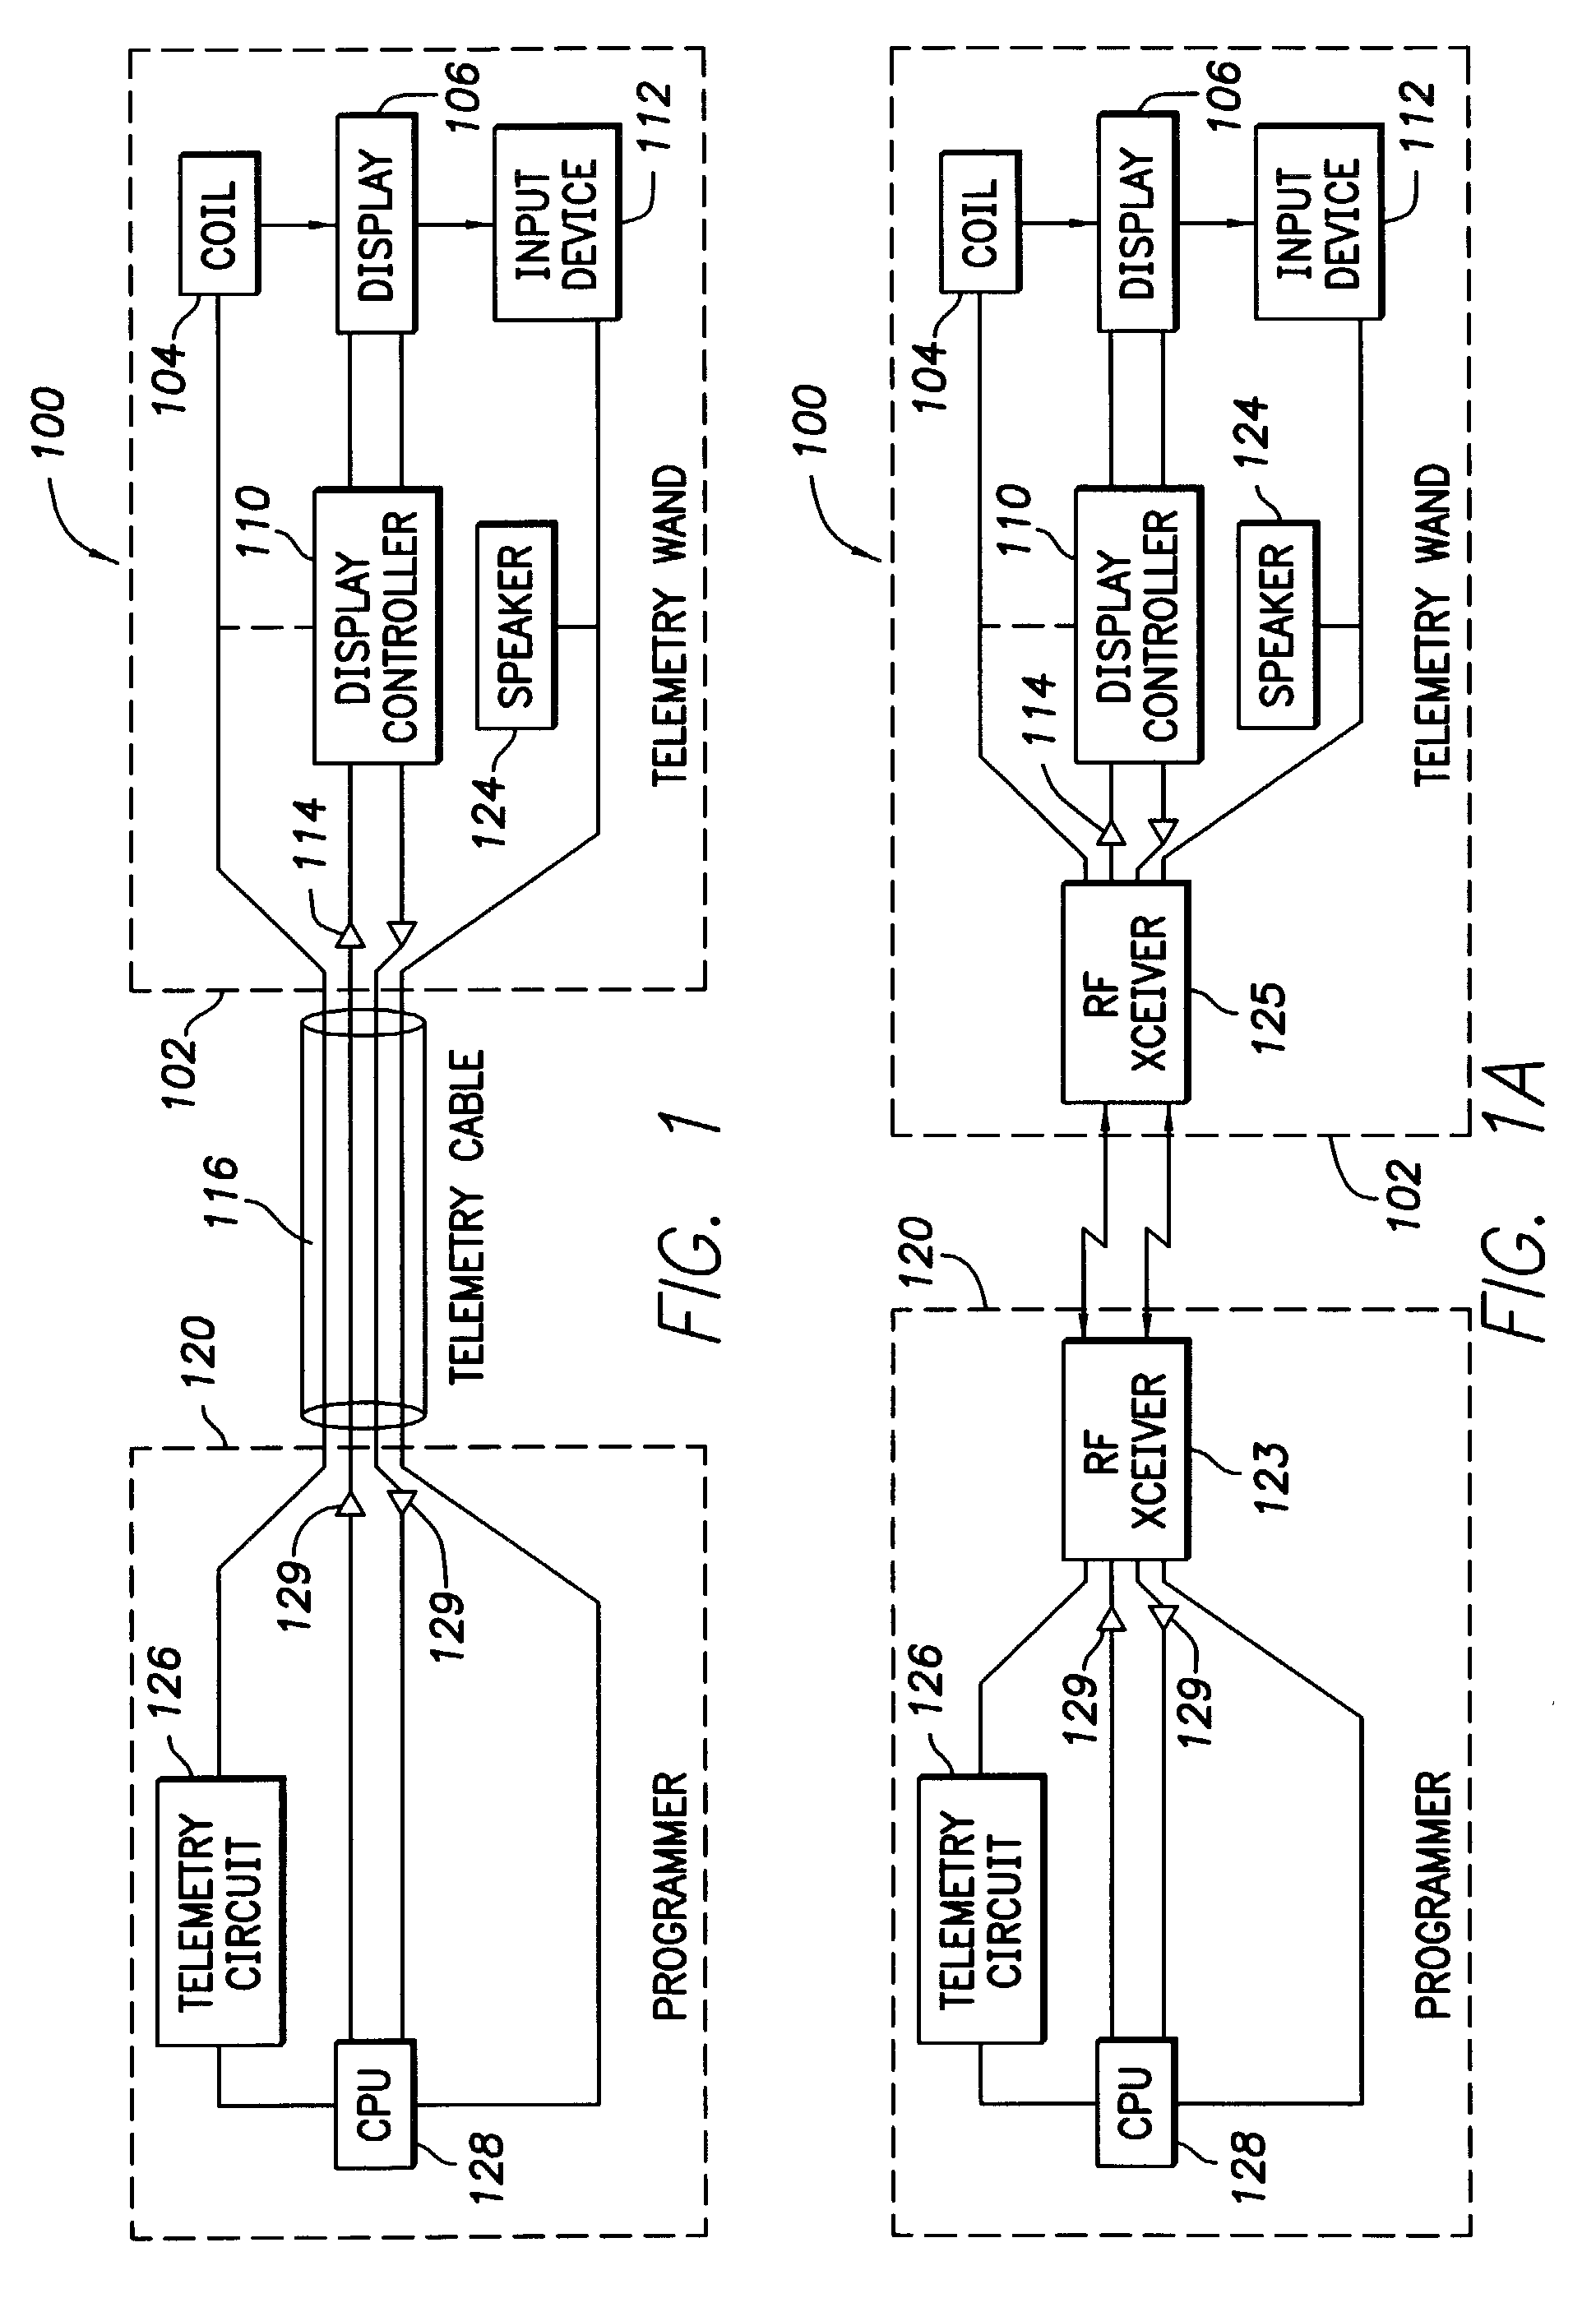 Telemetry wand with display and control for implantable medical devices